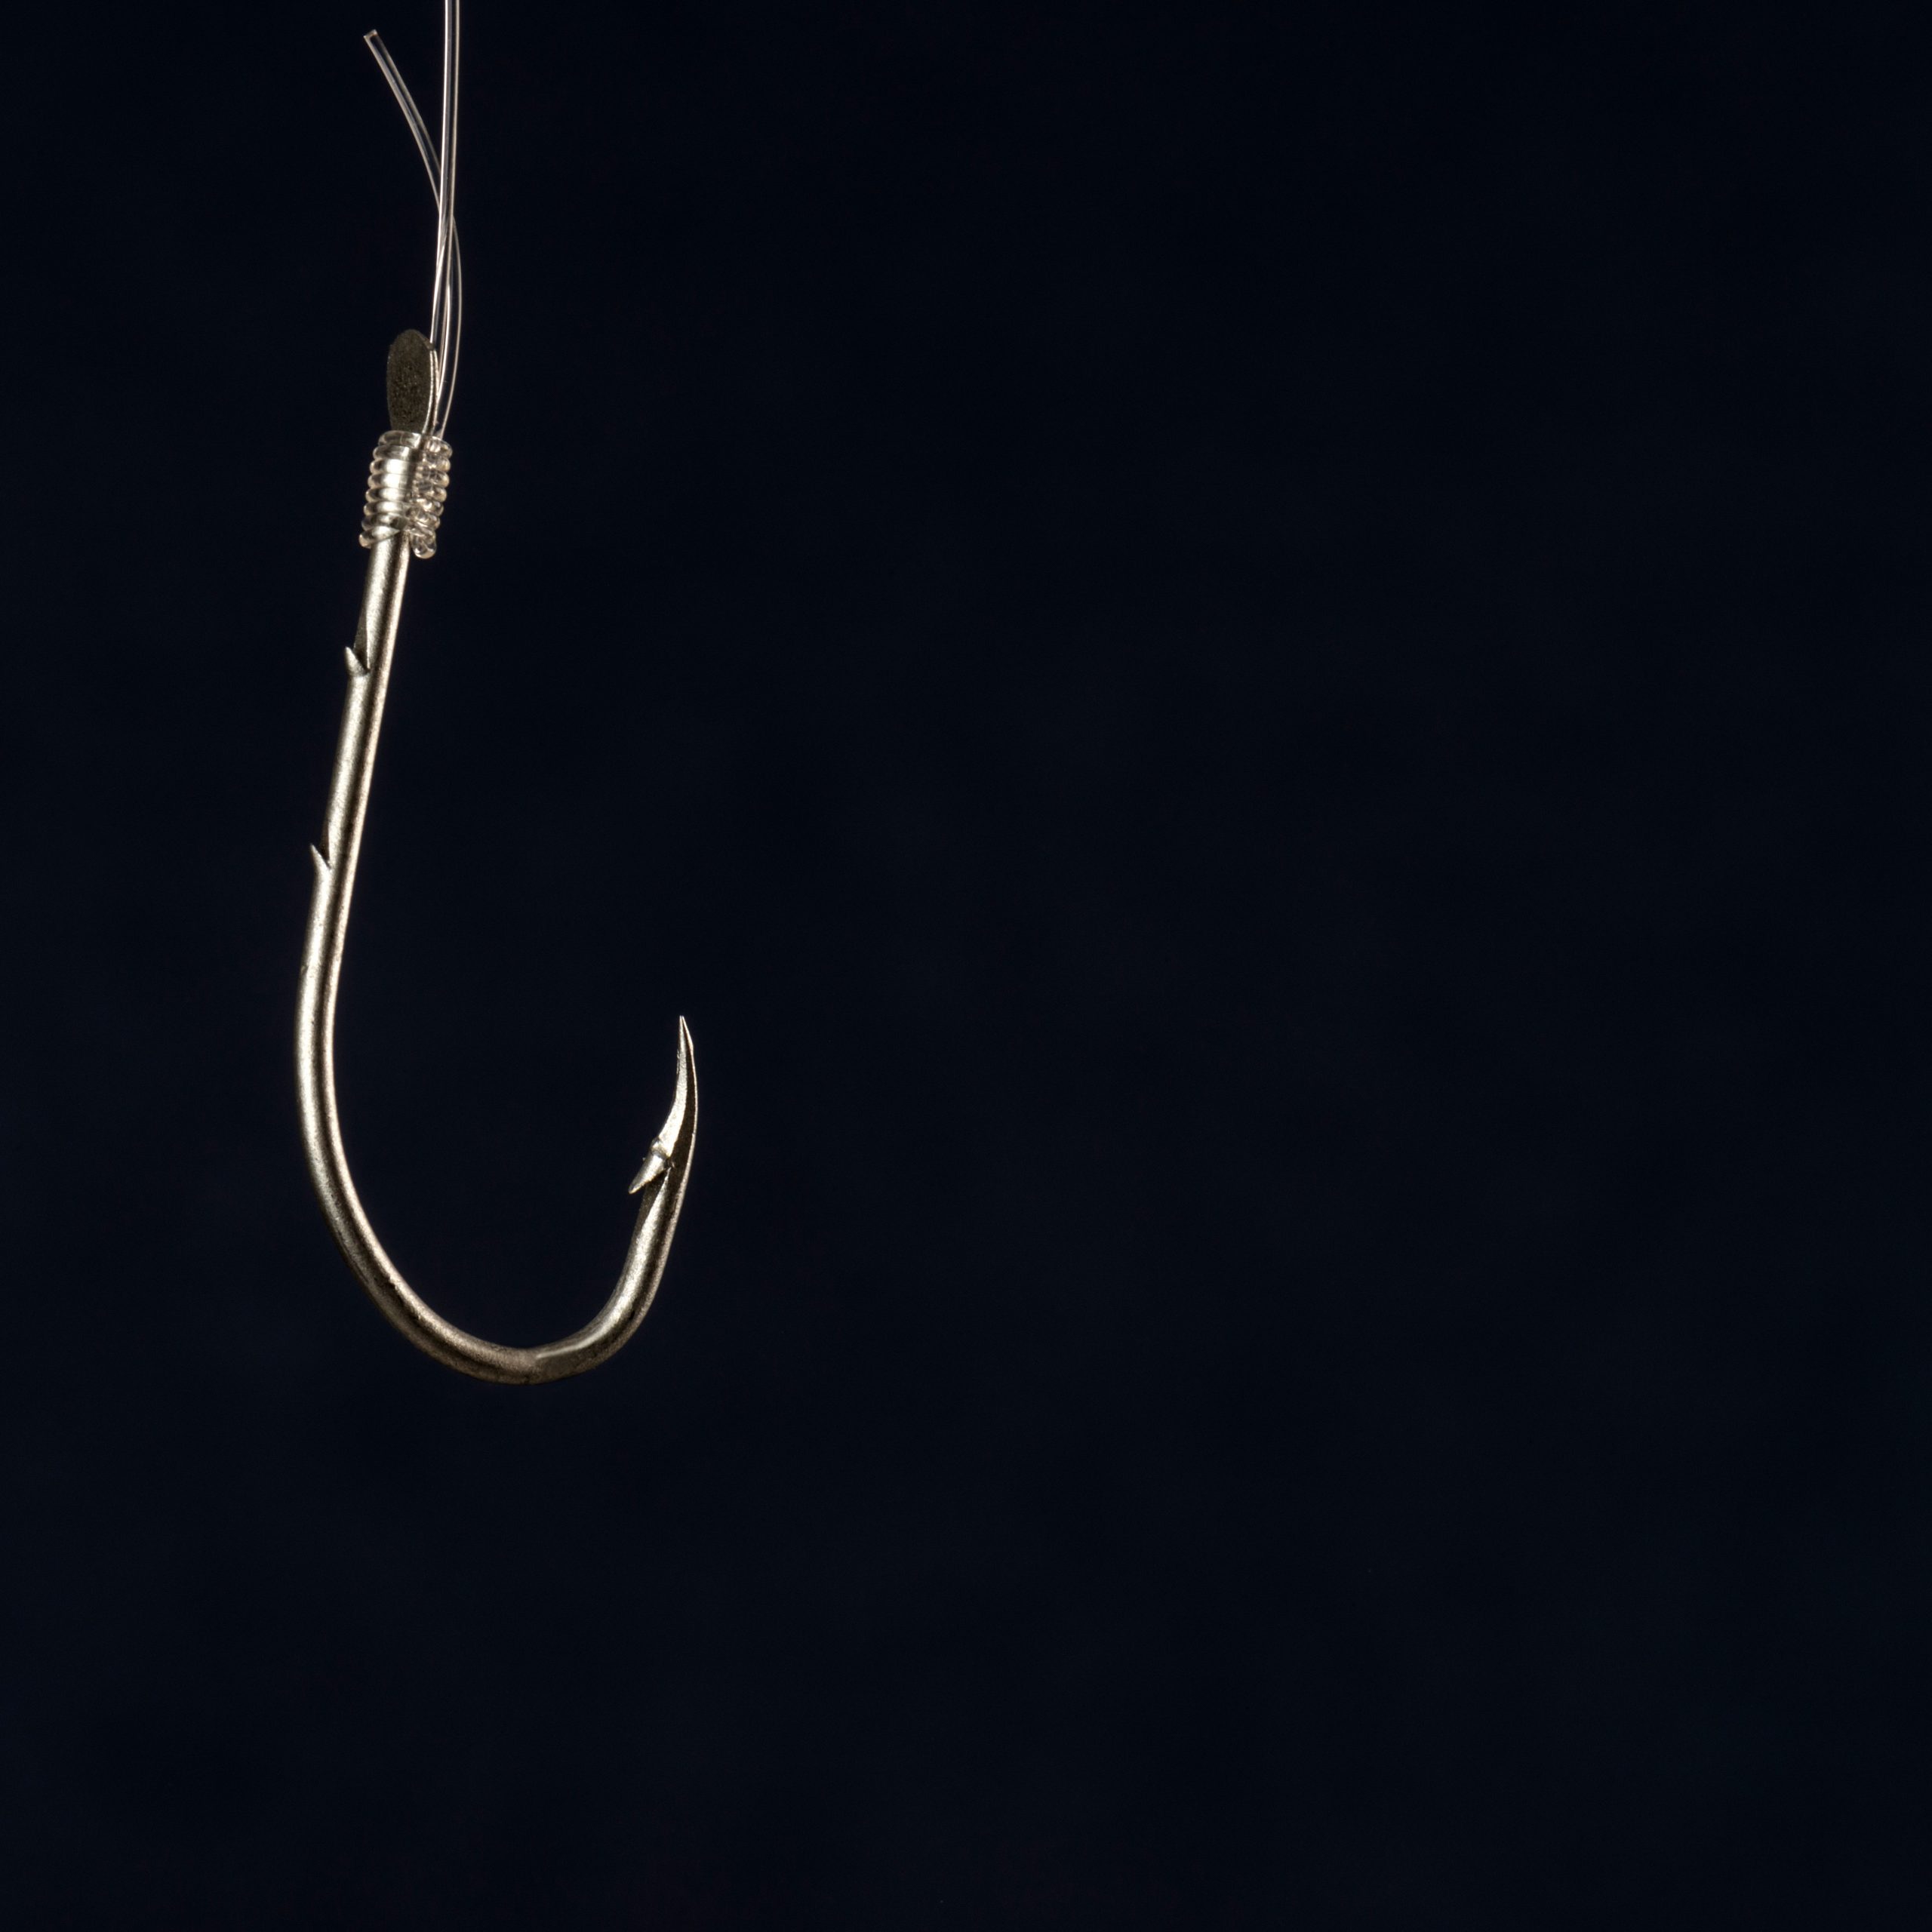 campagne phishing experience utilisateur formation